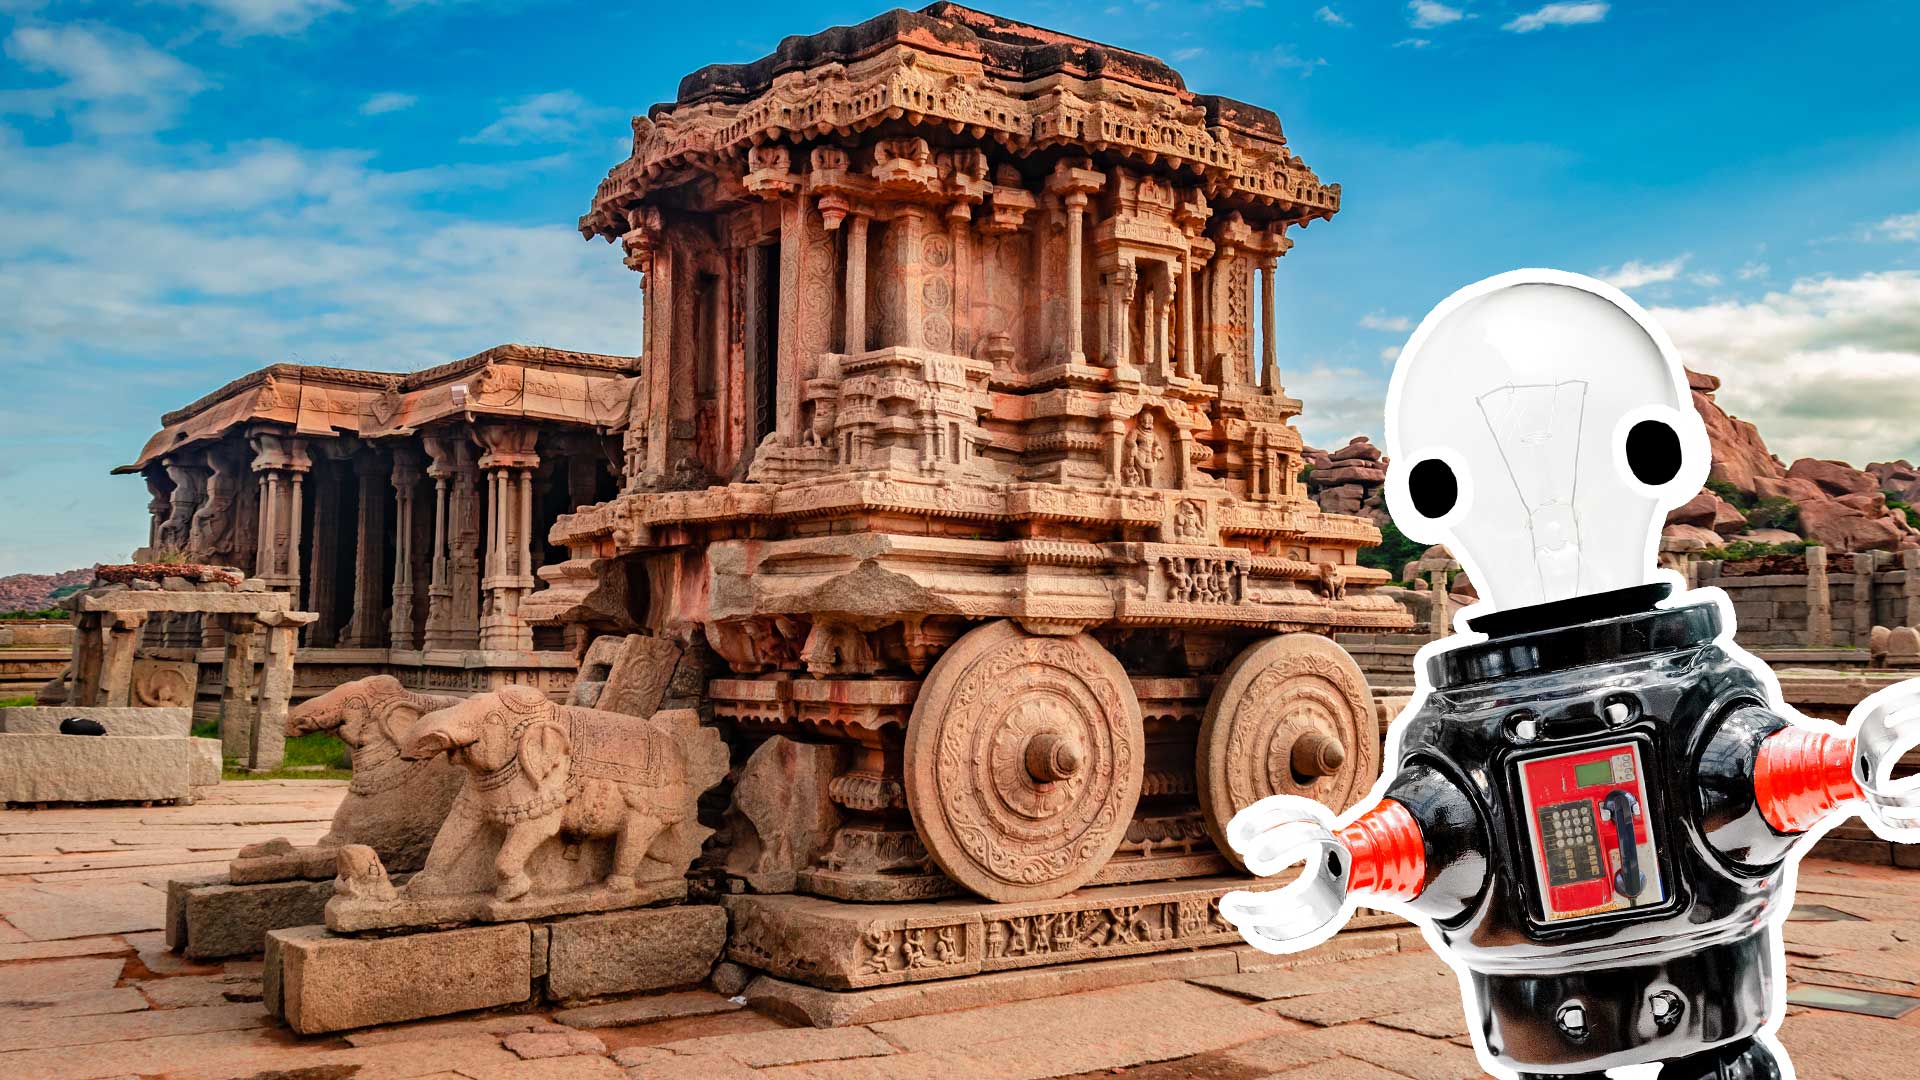 The city of Hampi and a robot